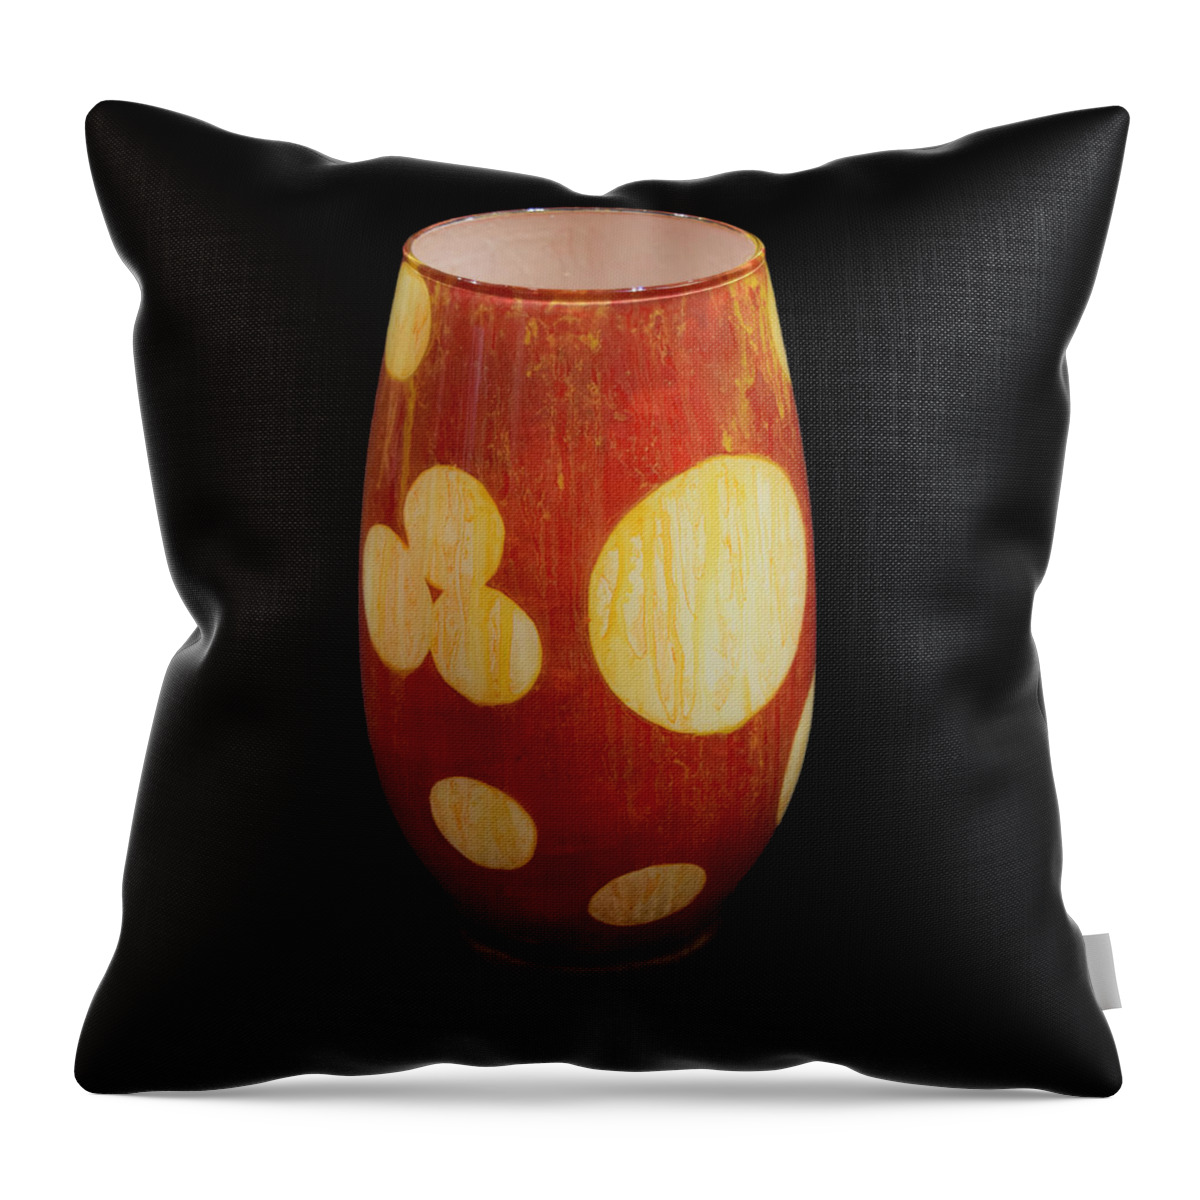 Vase Throw Pillow featuring the glass art Yellow and White Vase #1 by Christopher Schranck